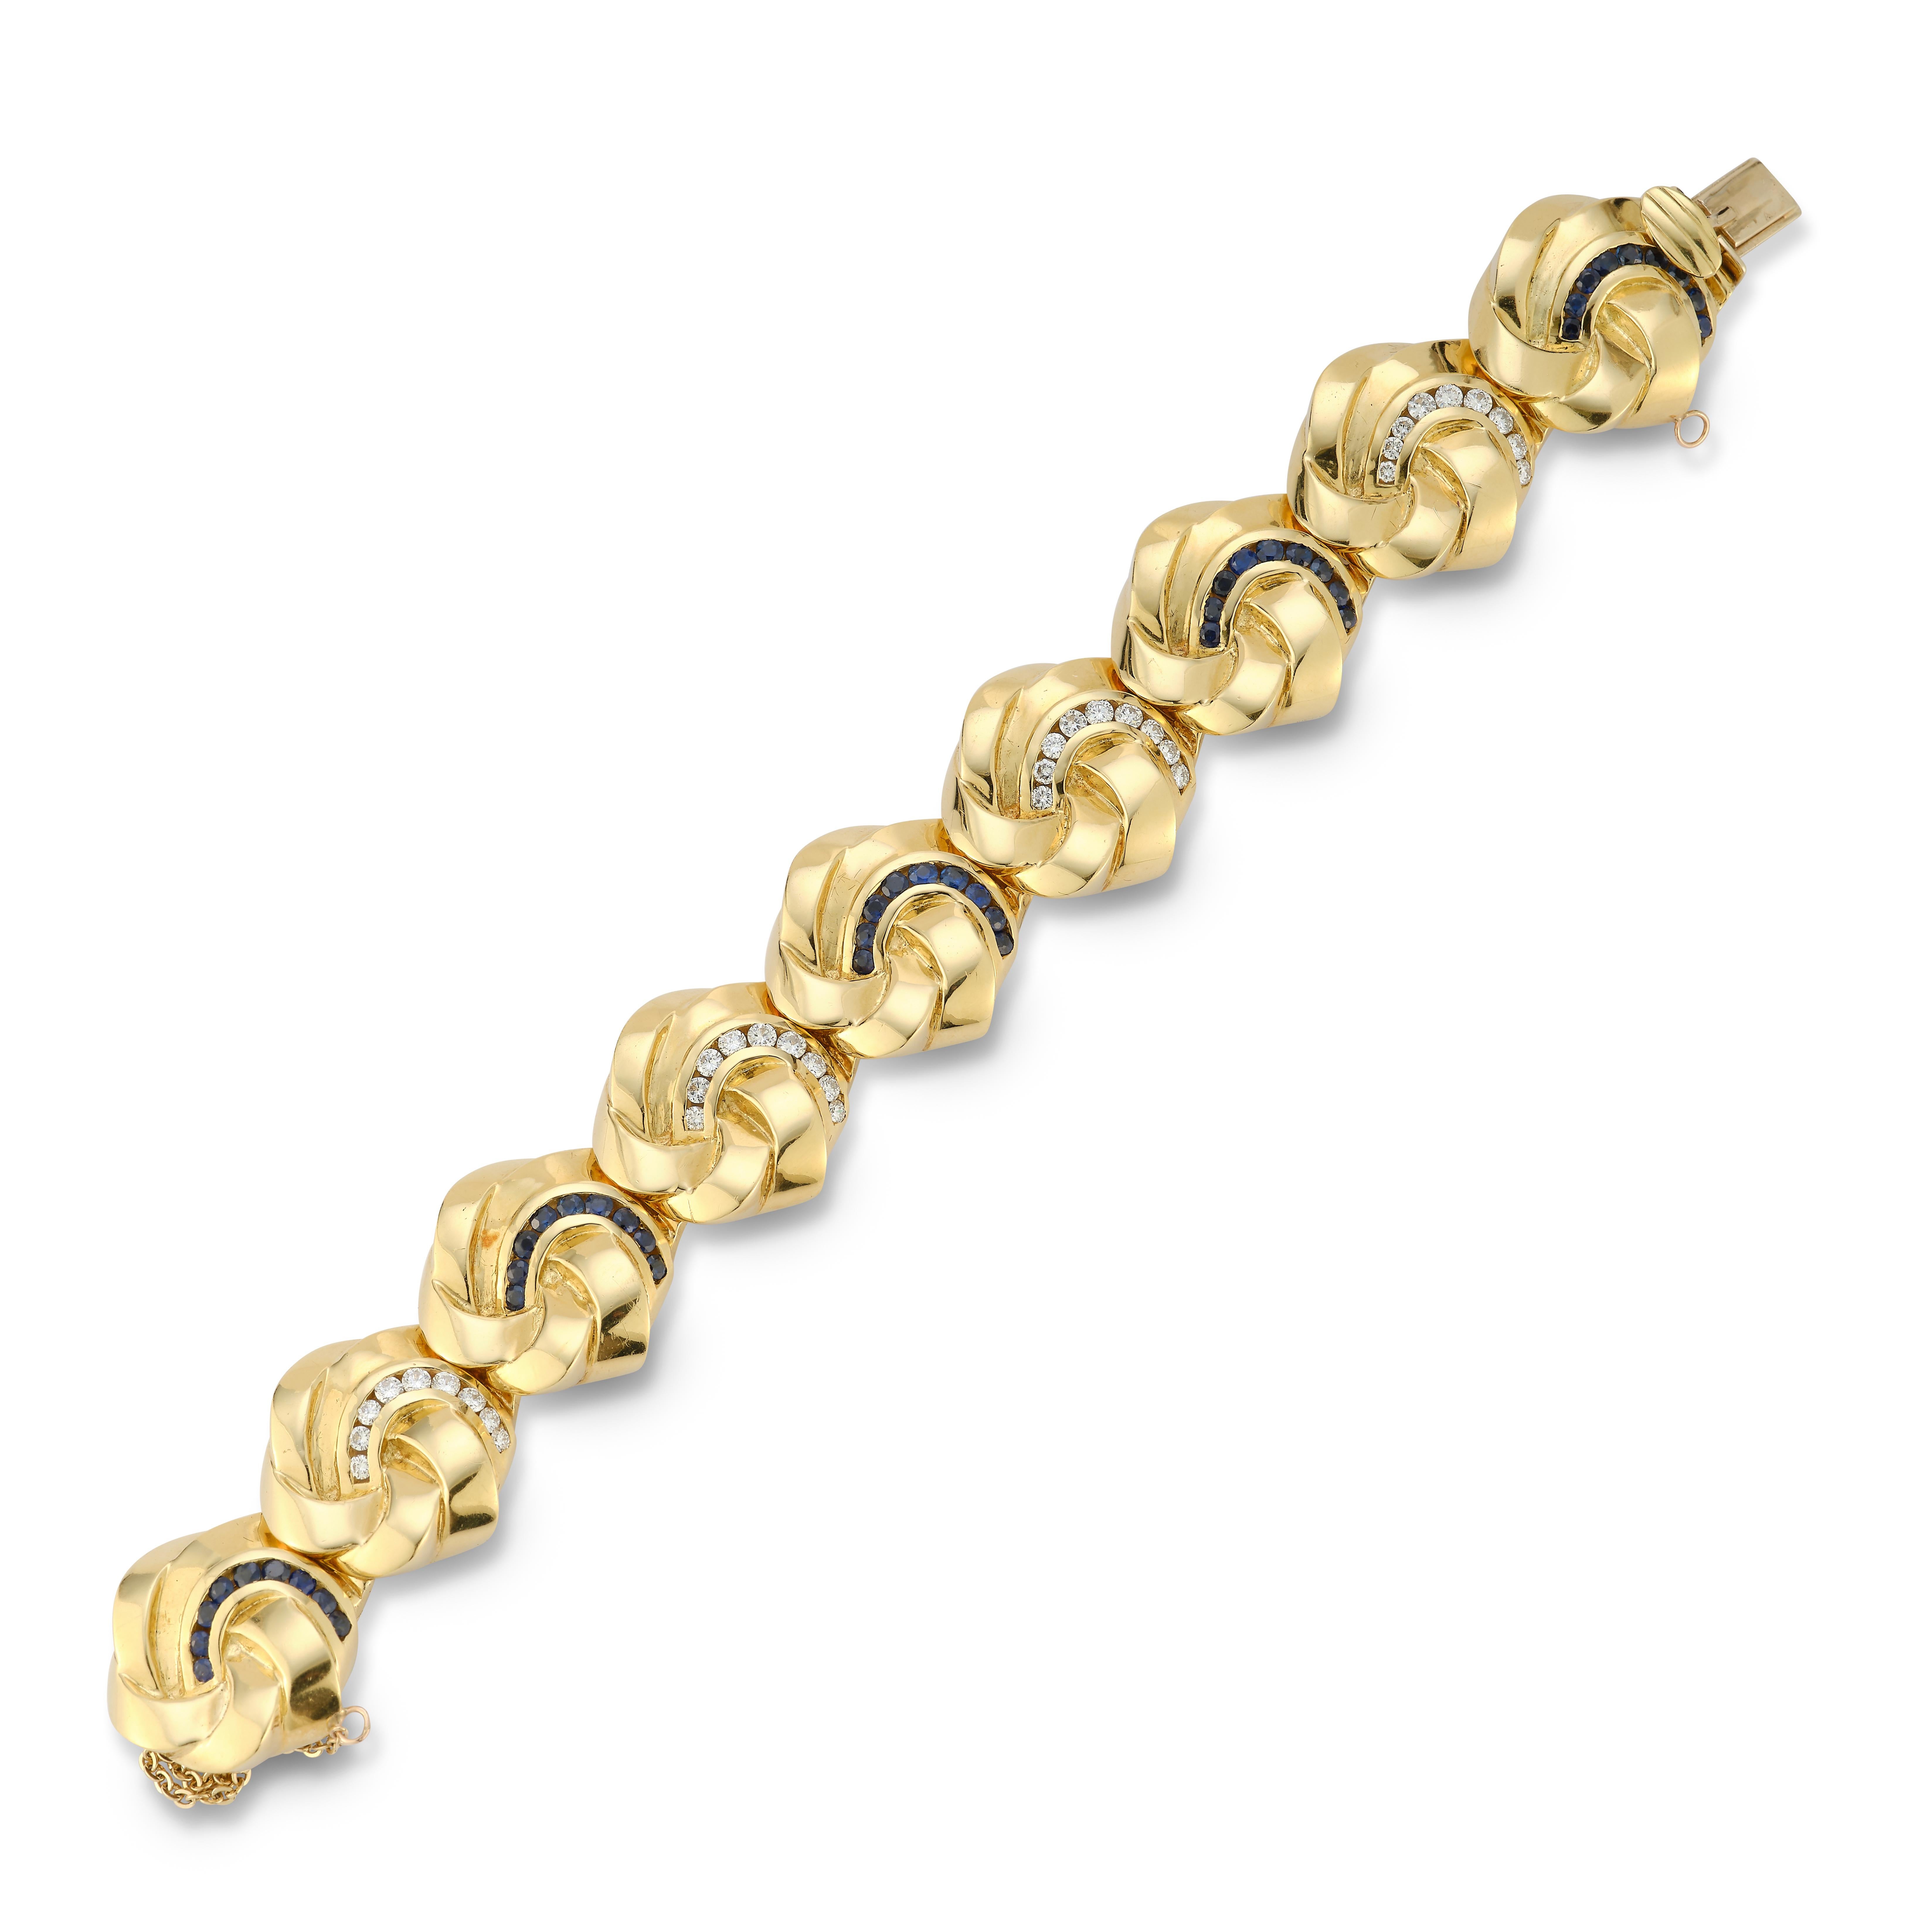 Diamond & Sapphire Gold Bracelet with safety lock
Gold Type: 14K Yellow Gold
36 diamonds, approx 1.5 cts
45 Sapphires
82.9 Grams
Measurements: 7.5